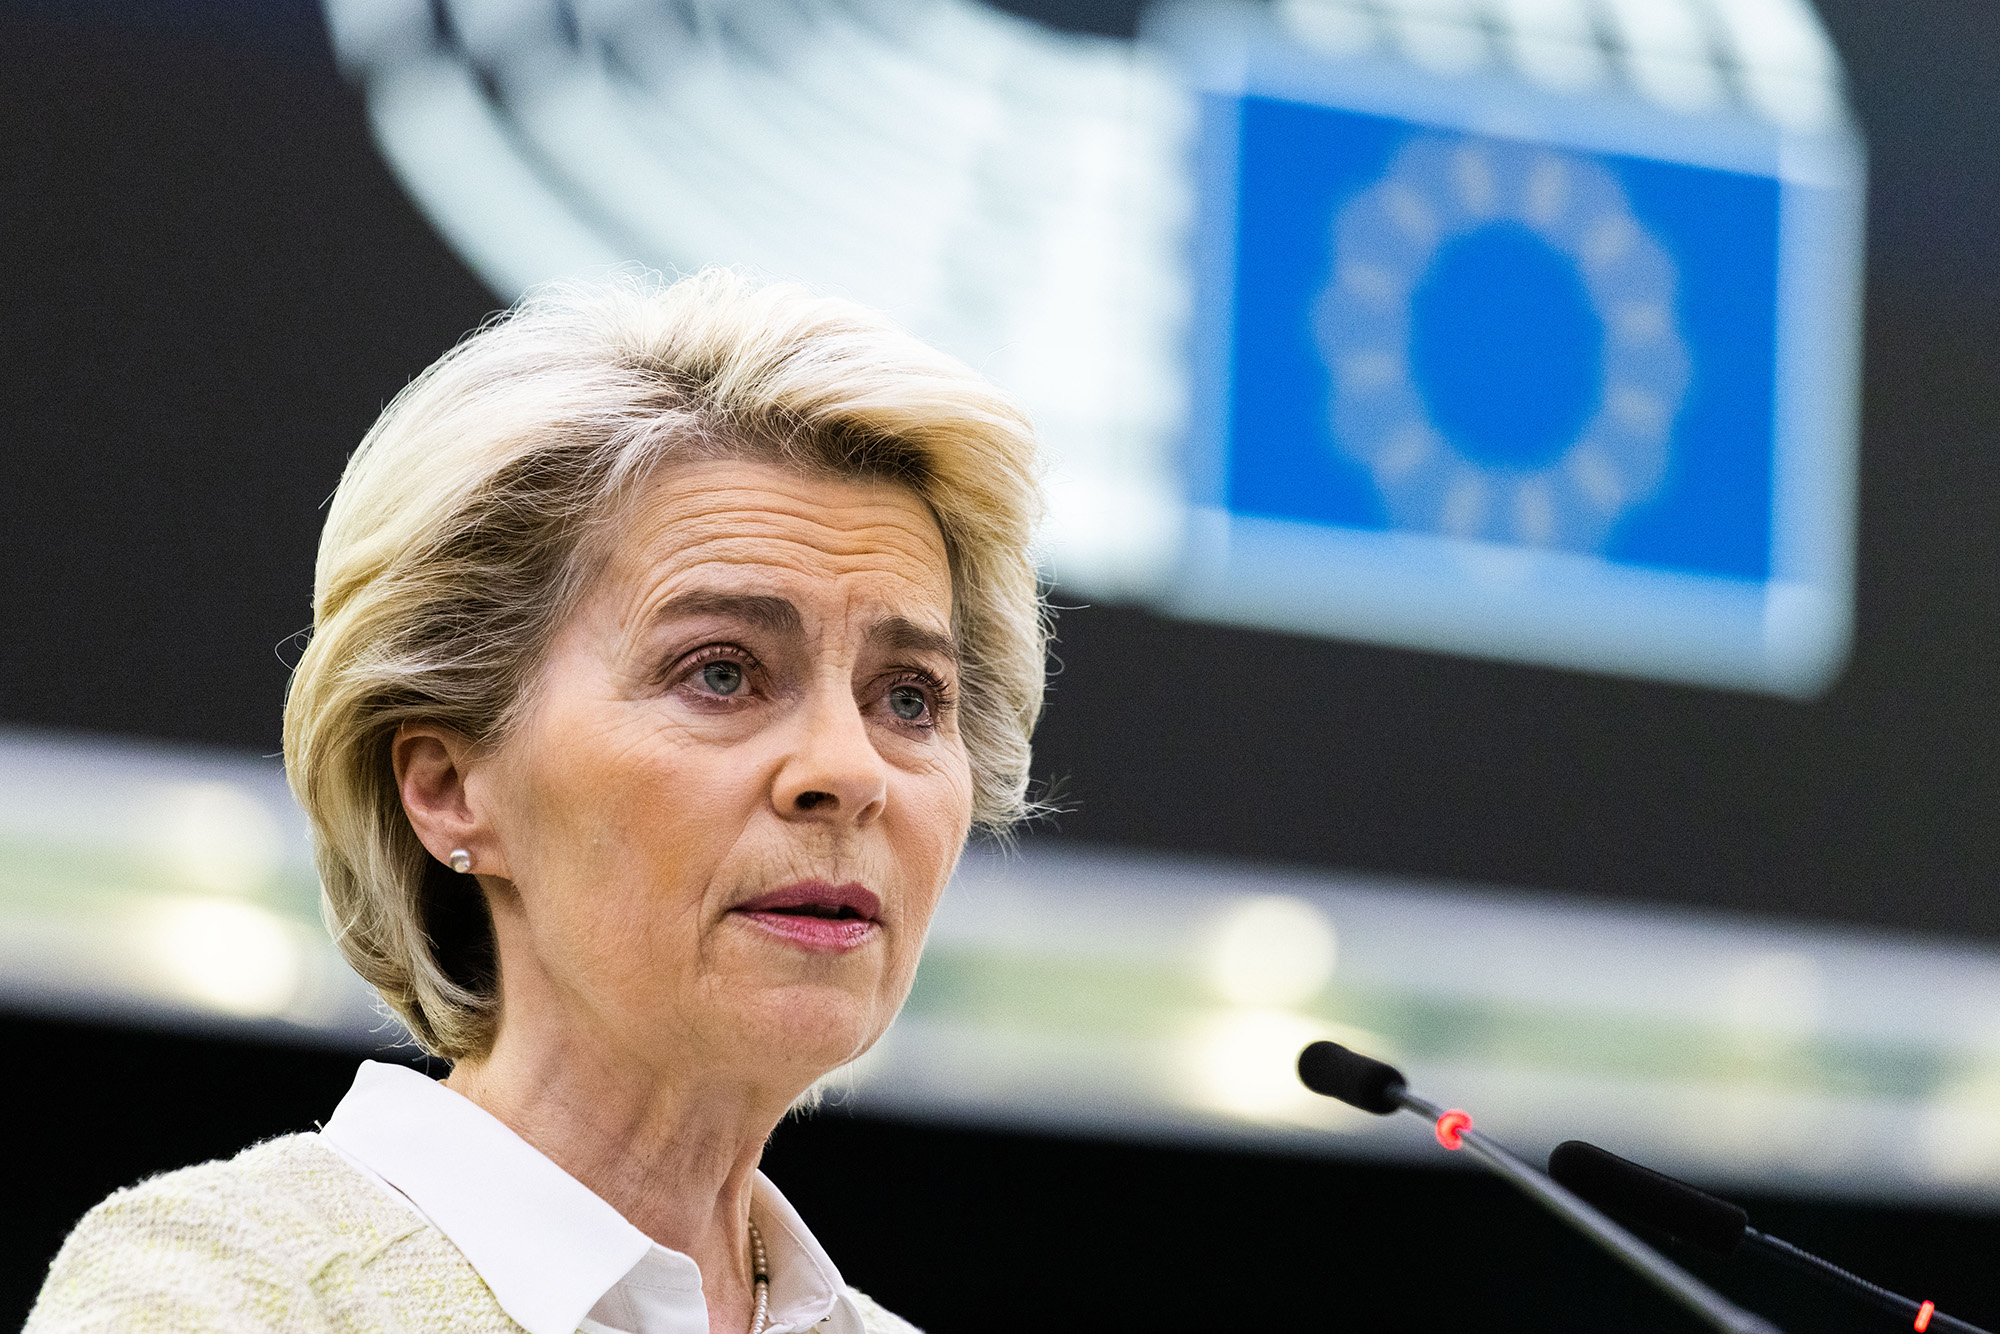 European Commission President Ursula von der Leyen said Wednesday the measures would form part of a sixth round of sanctions against Russia over its invasion of Ukraine.